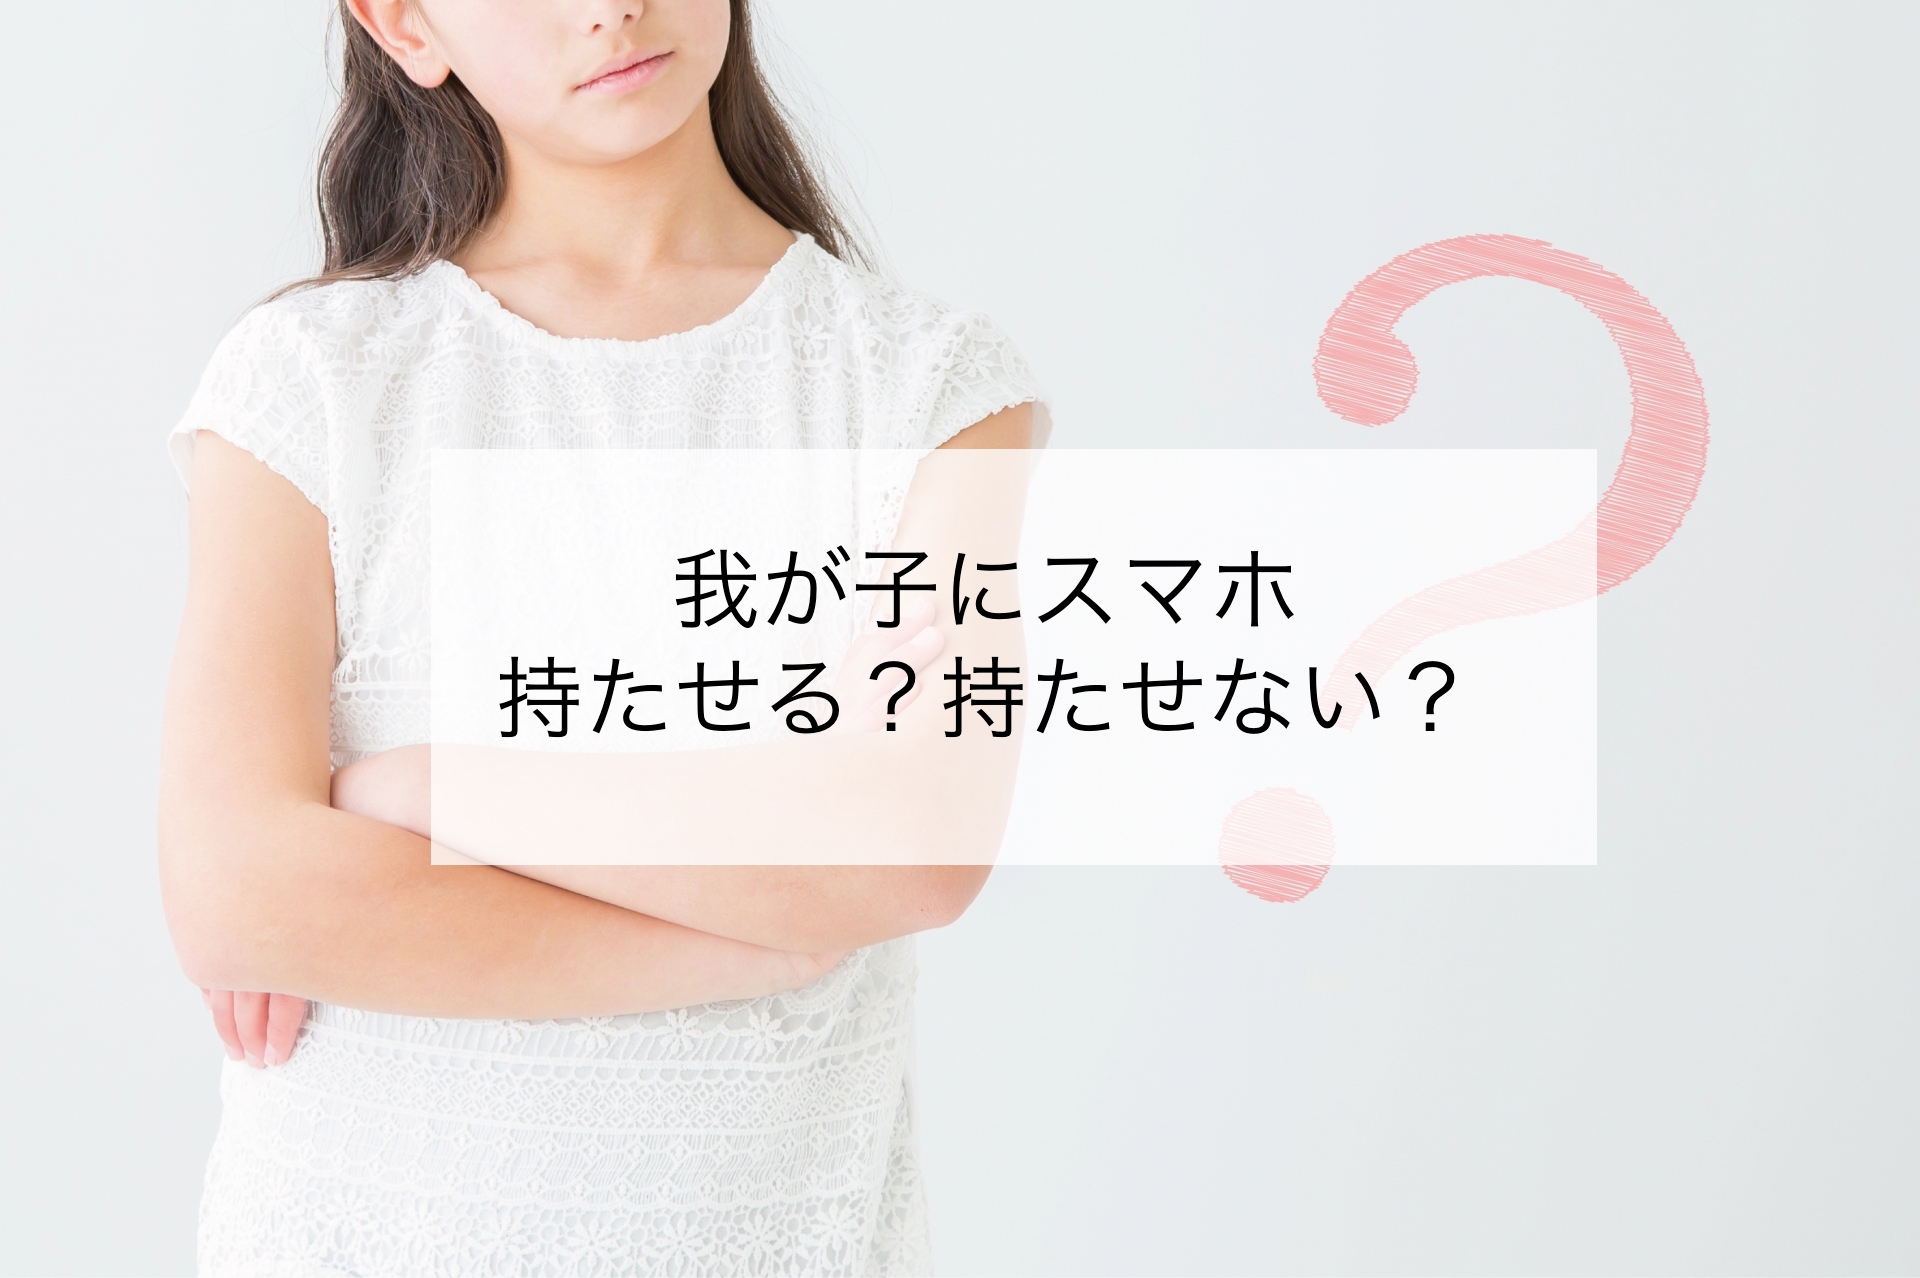 You are currently viewing 我が子にスマホは持たせる？持たせない？